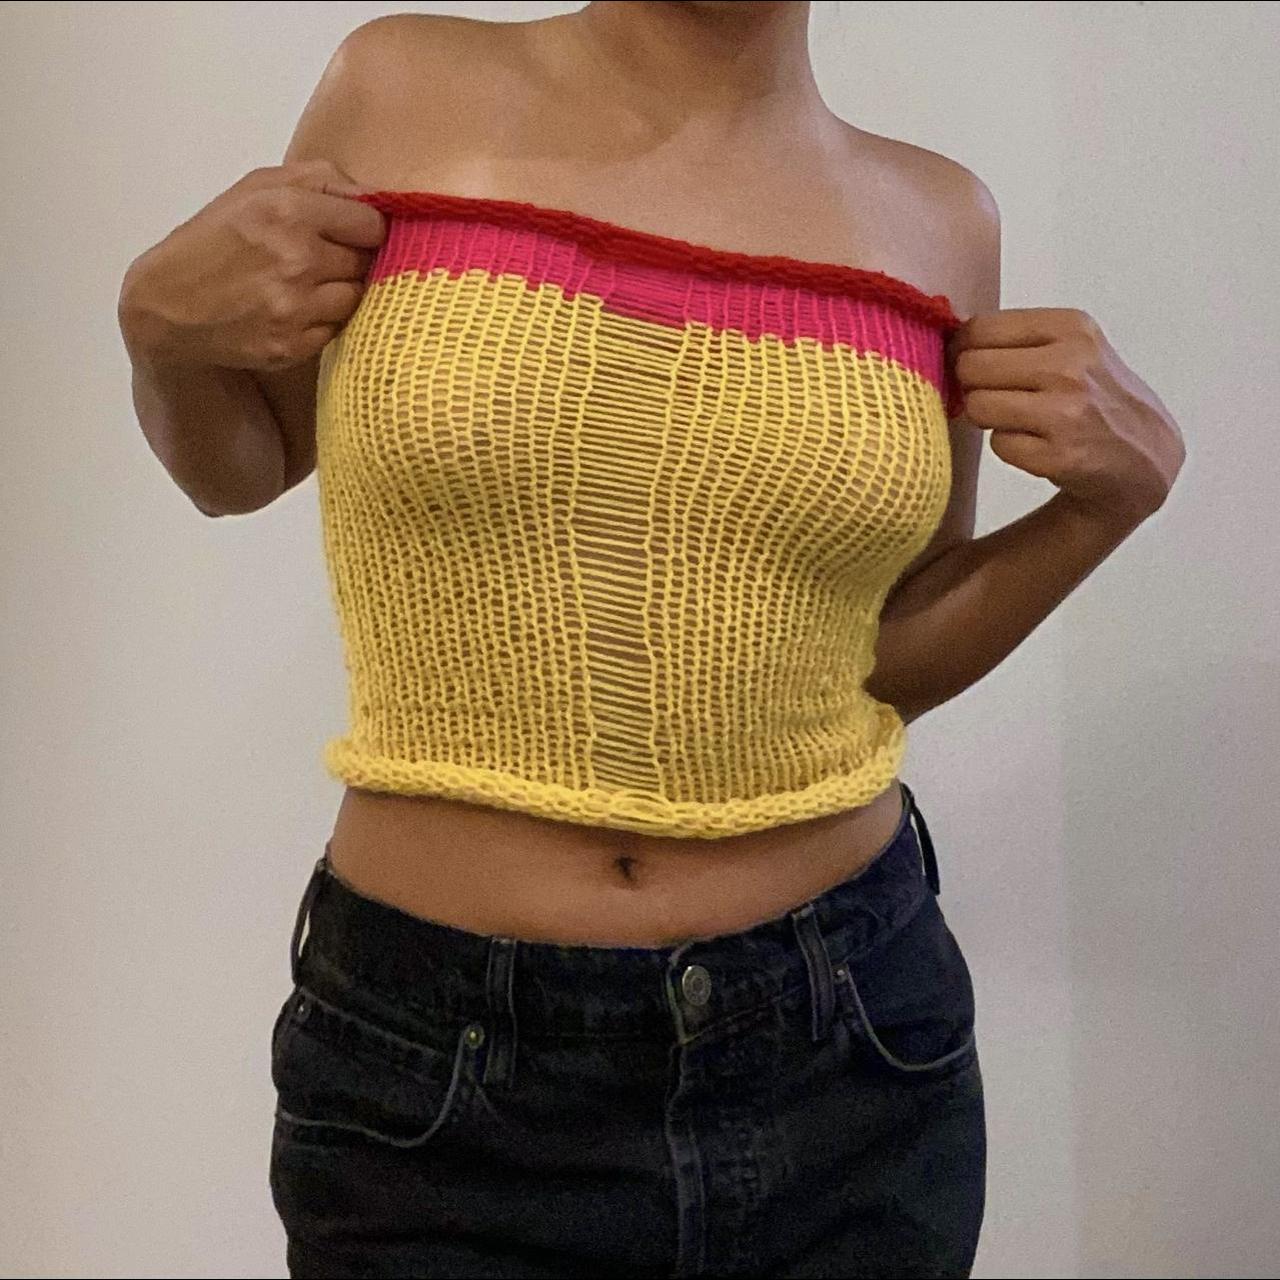 Knitted Tube Top Handmade by me with 100% acrylic - Depop